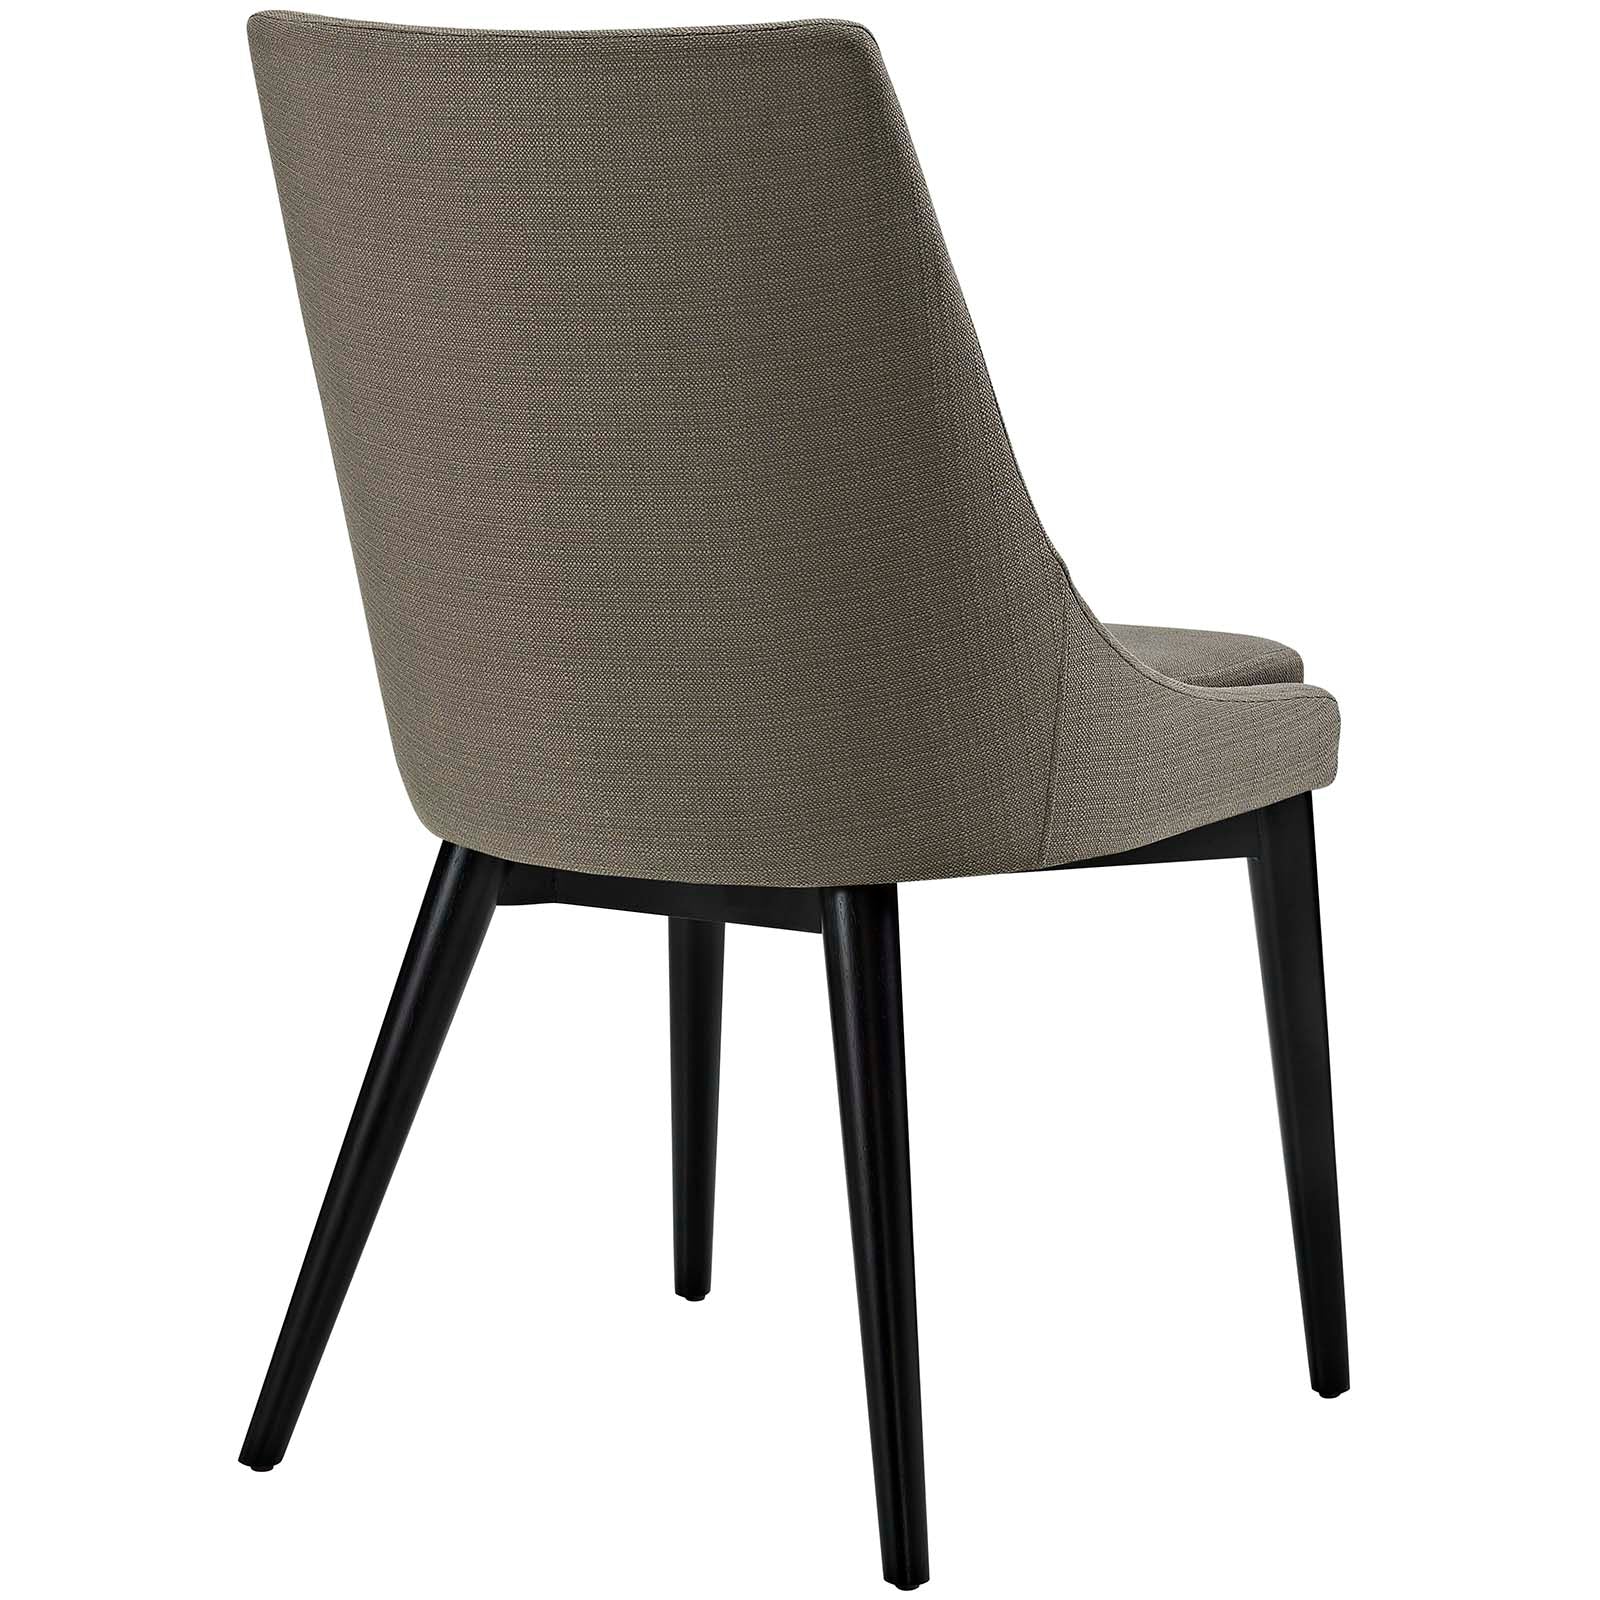 Modway Dining Chairs - Viscount Fabric Dining Chair Granite